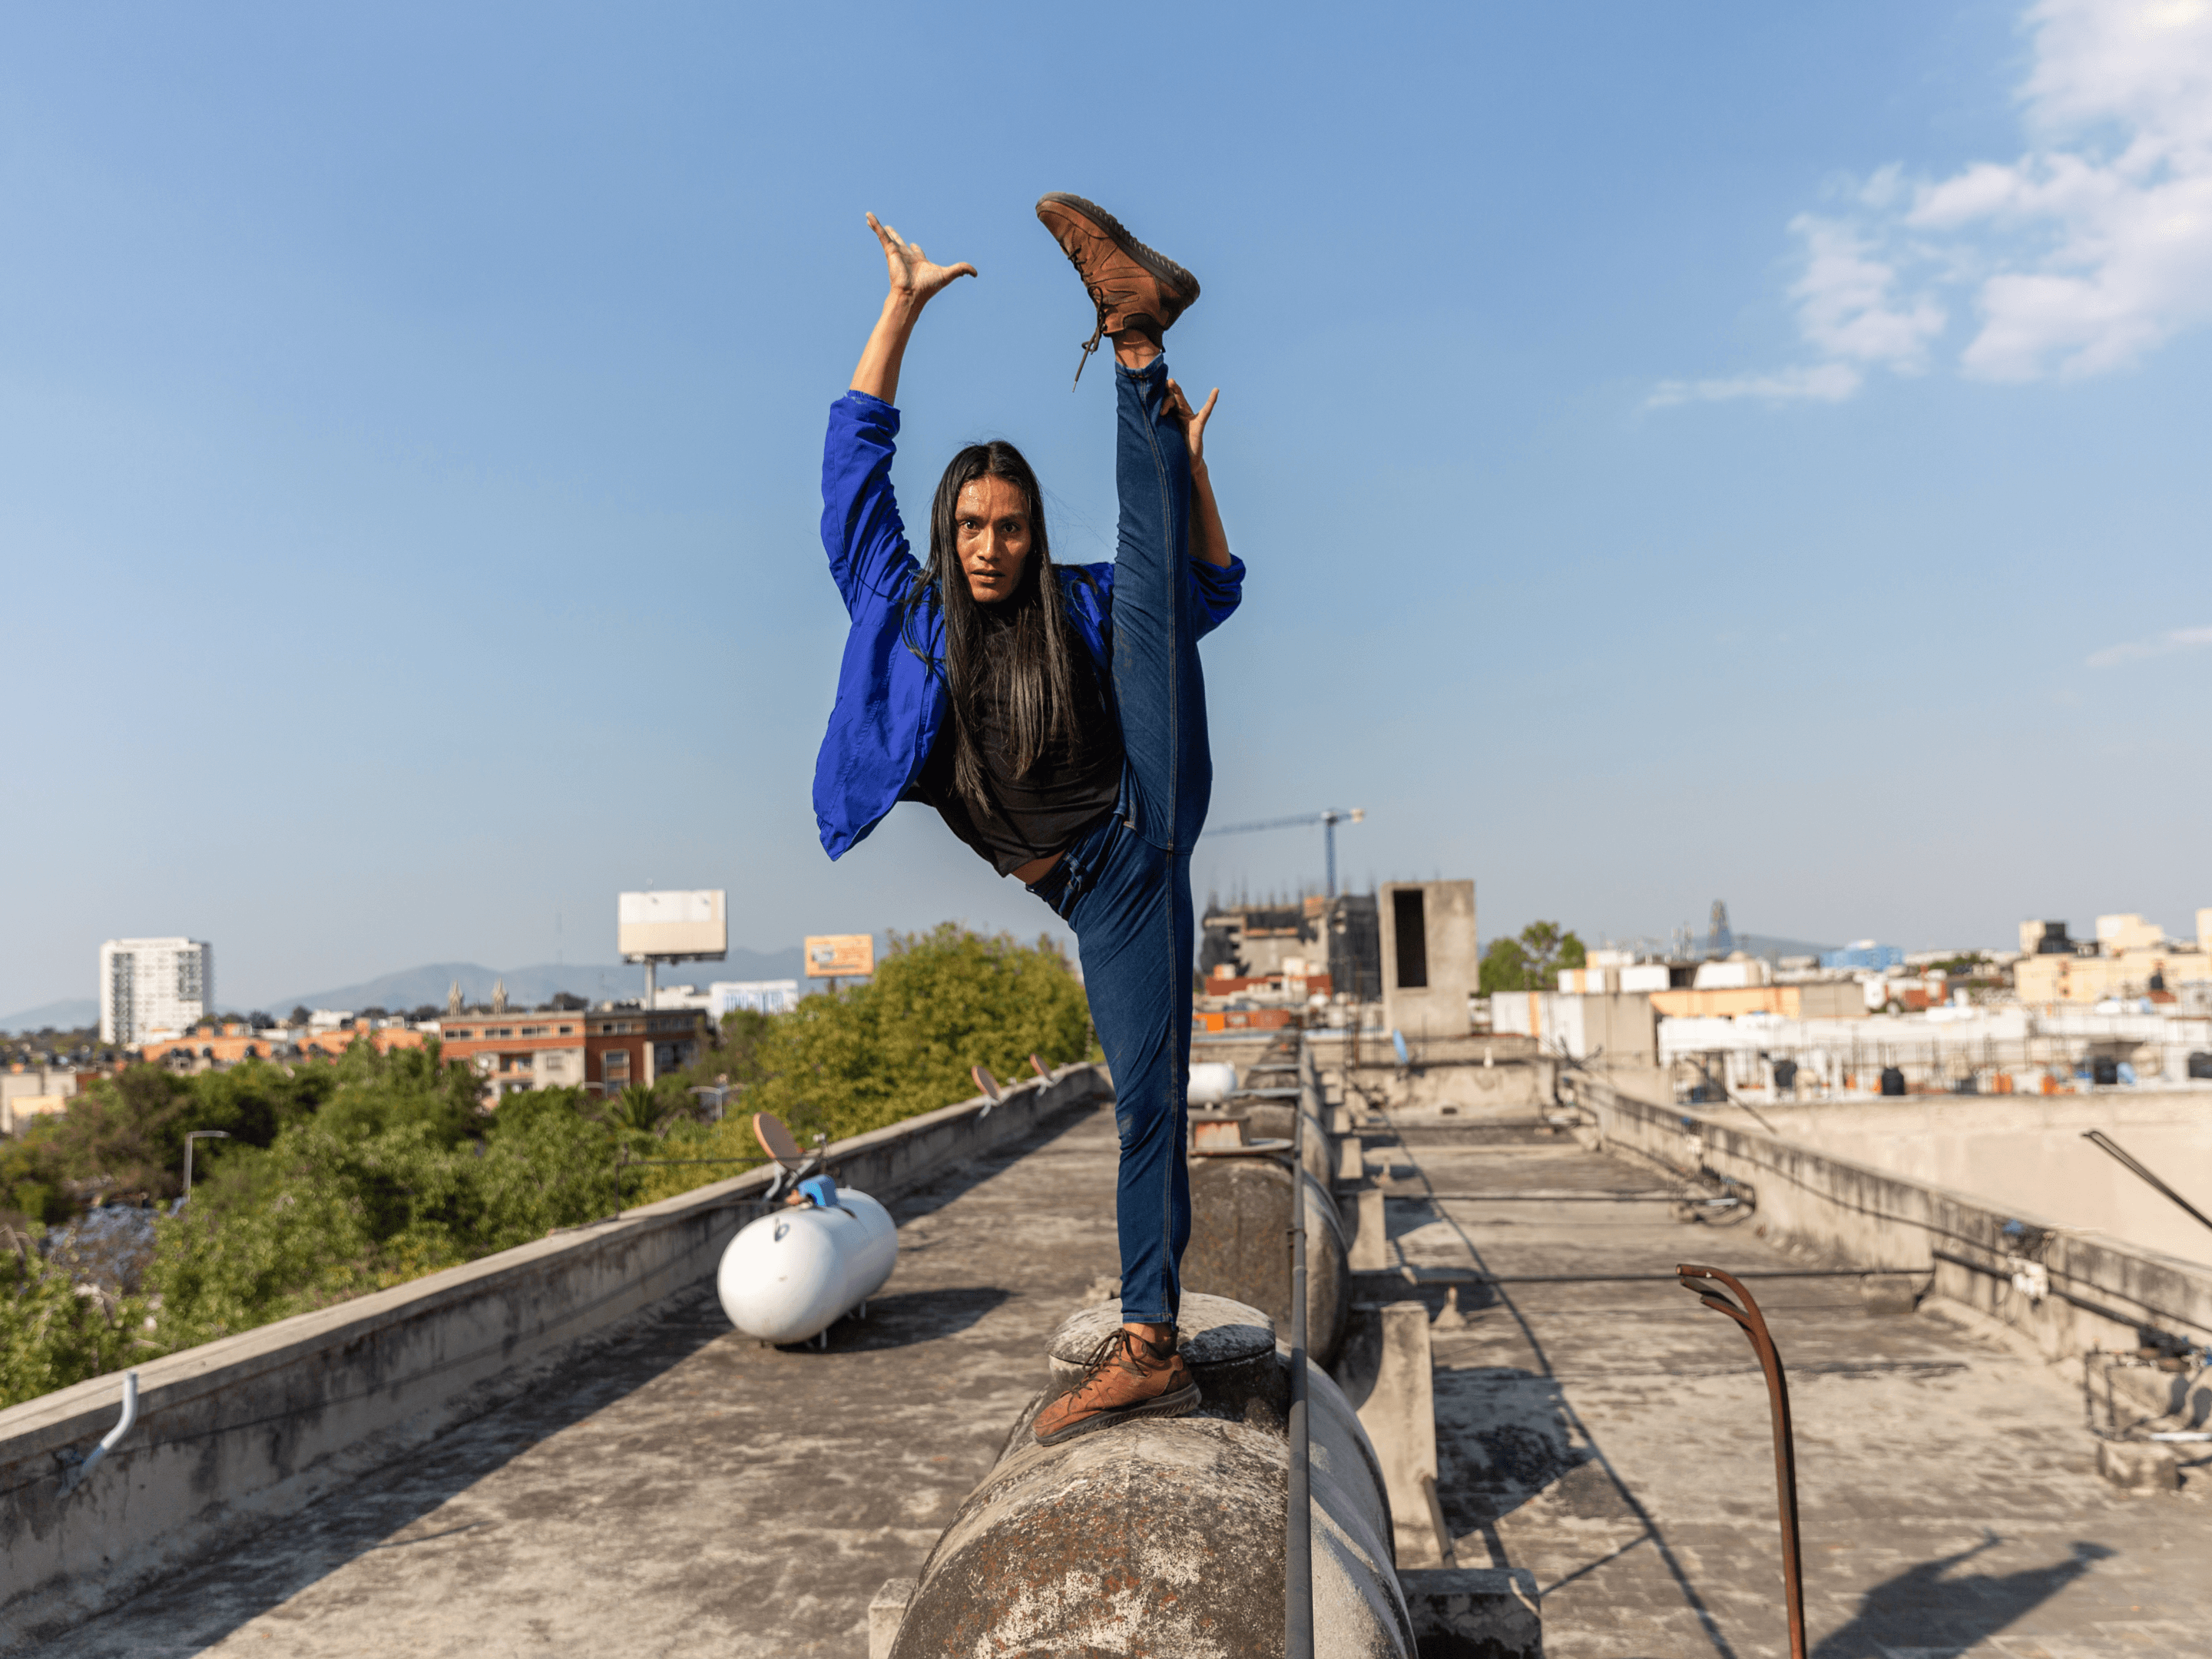 Dancers on Rooftops #101 - Jose (Mexico, 2022)